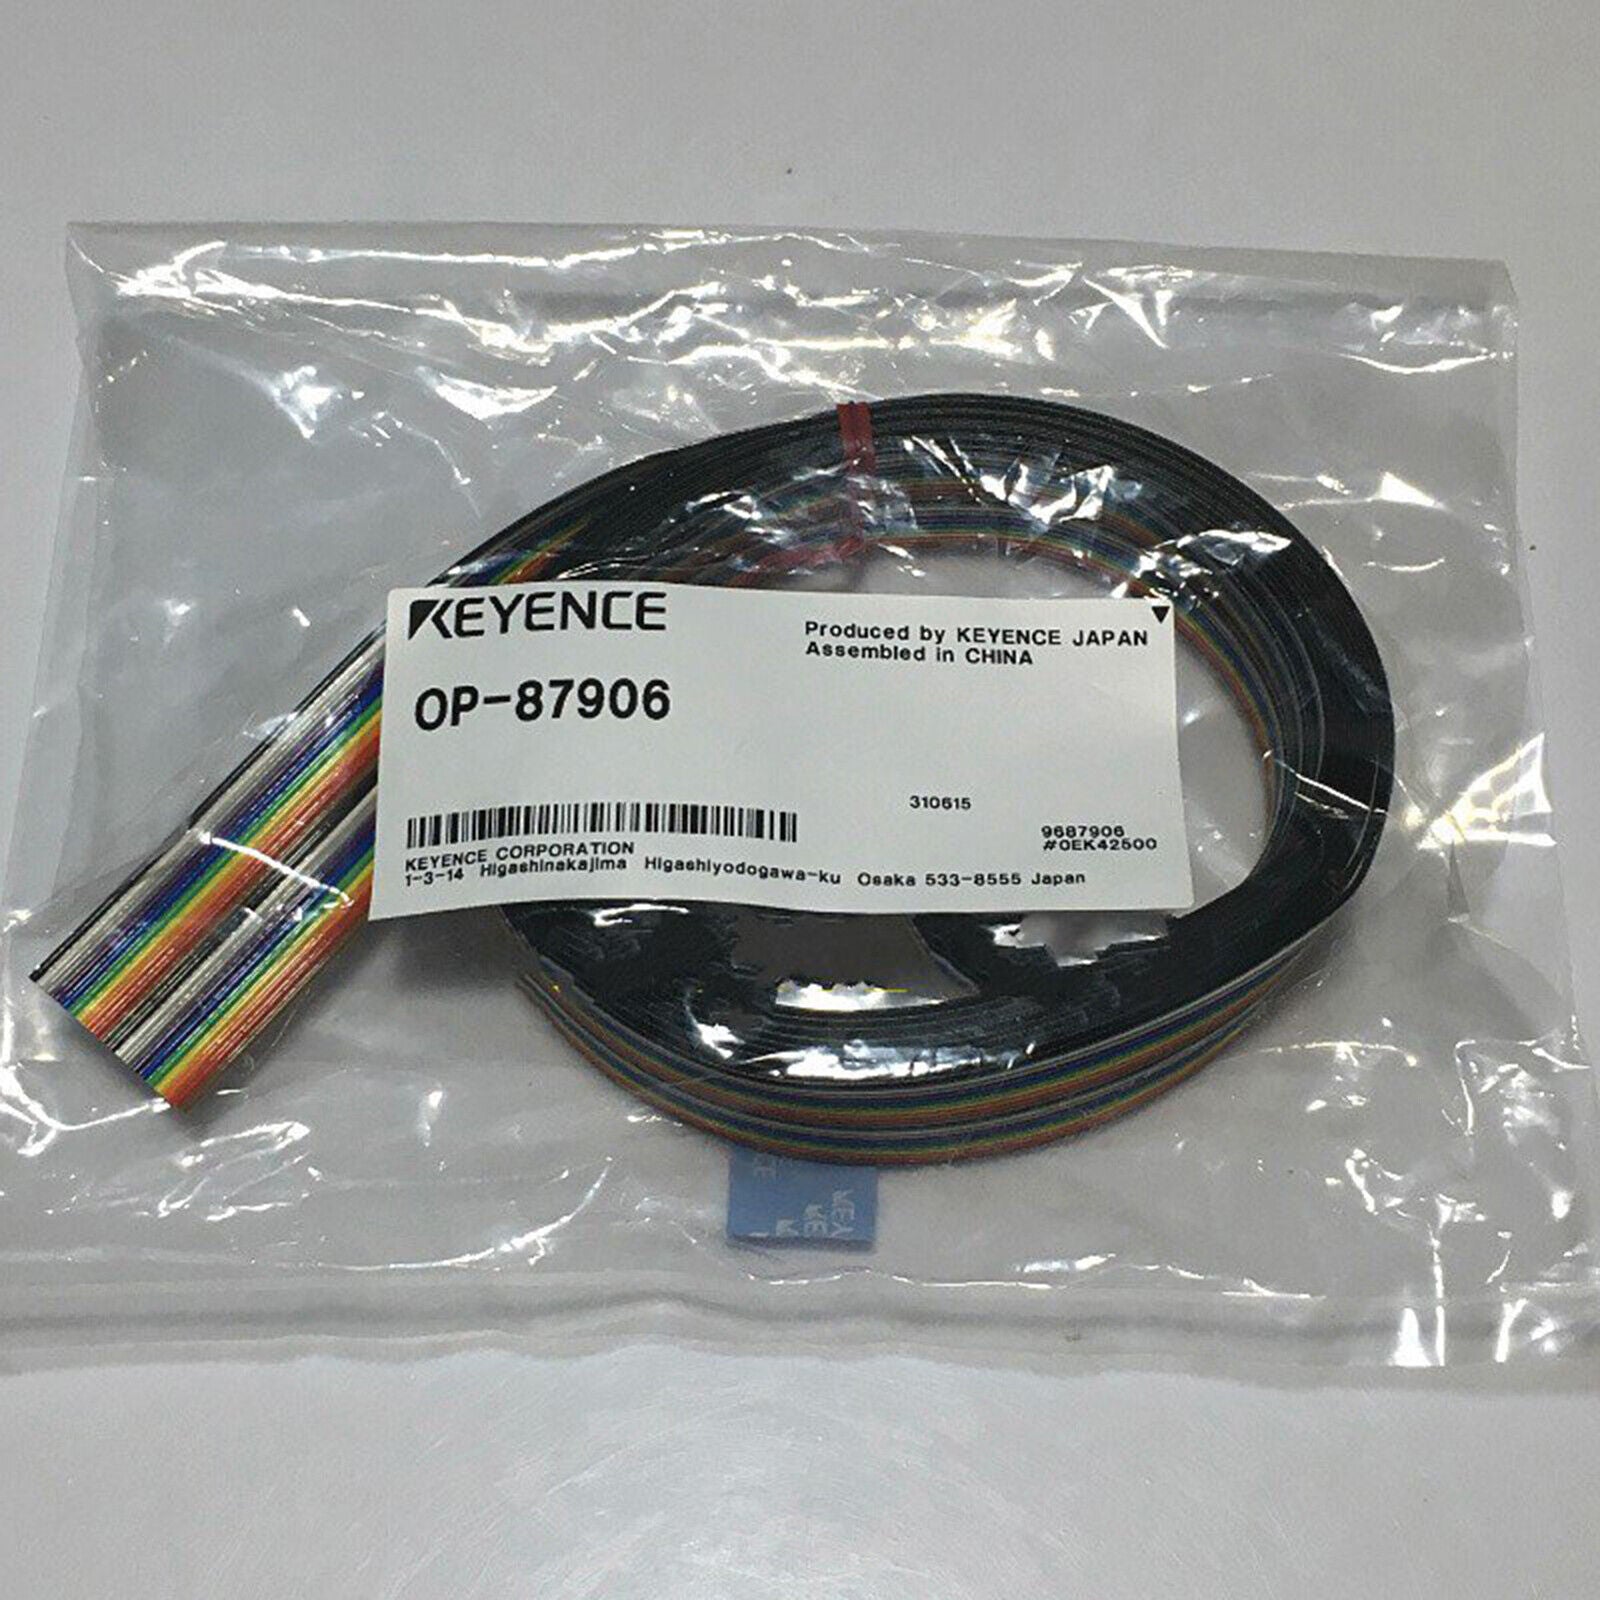 new 1pc   KEYENCE OP-87906 Visual connection ONE Year